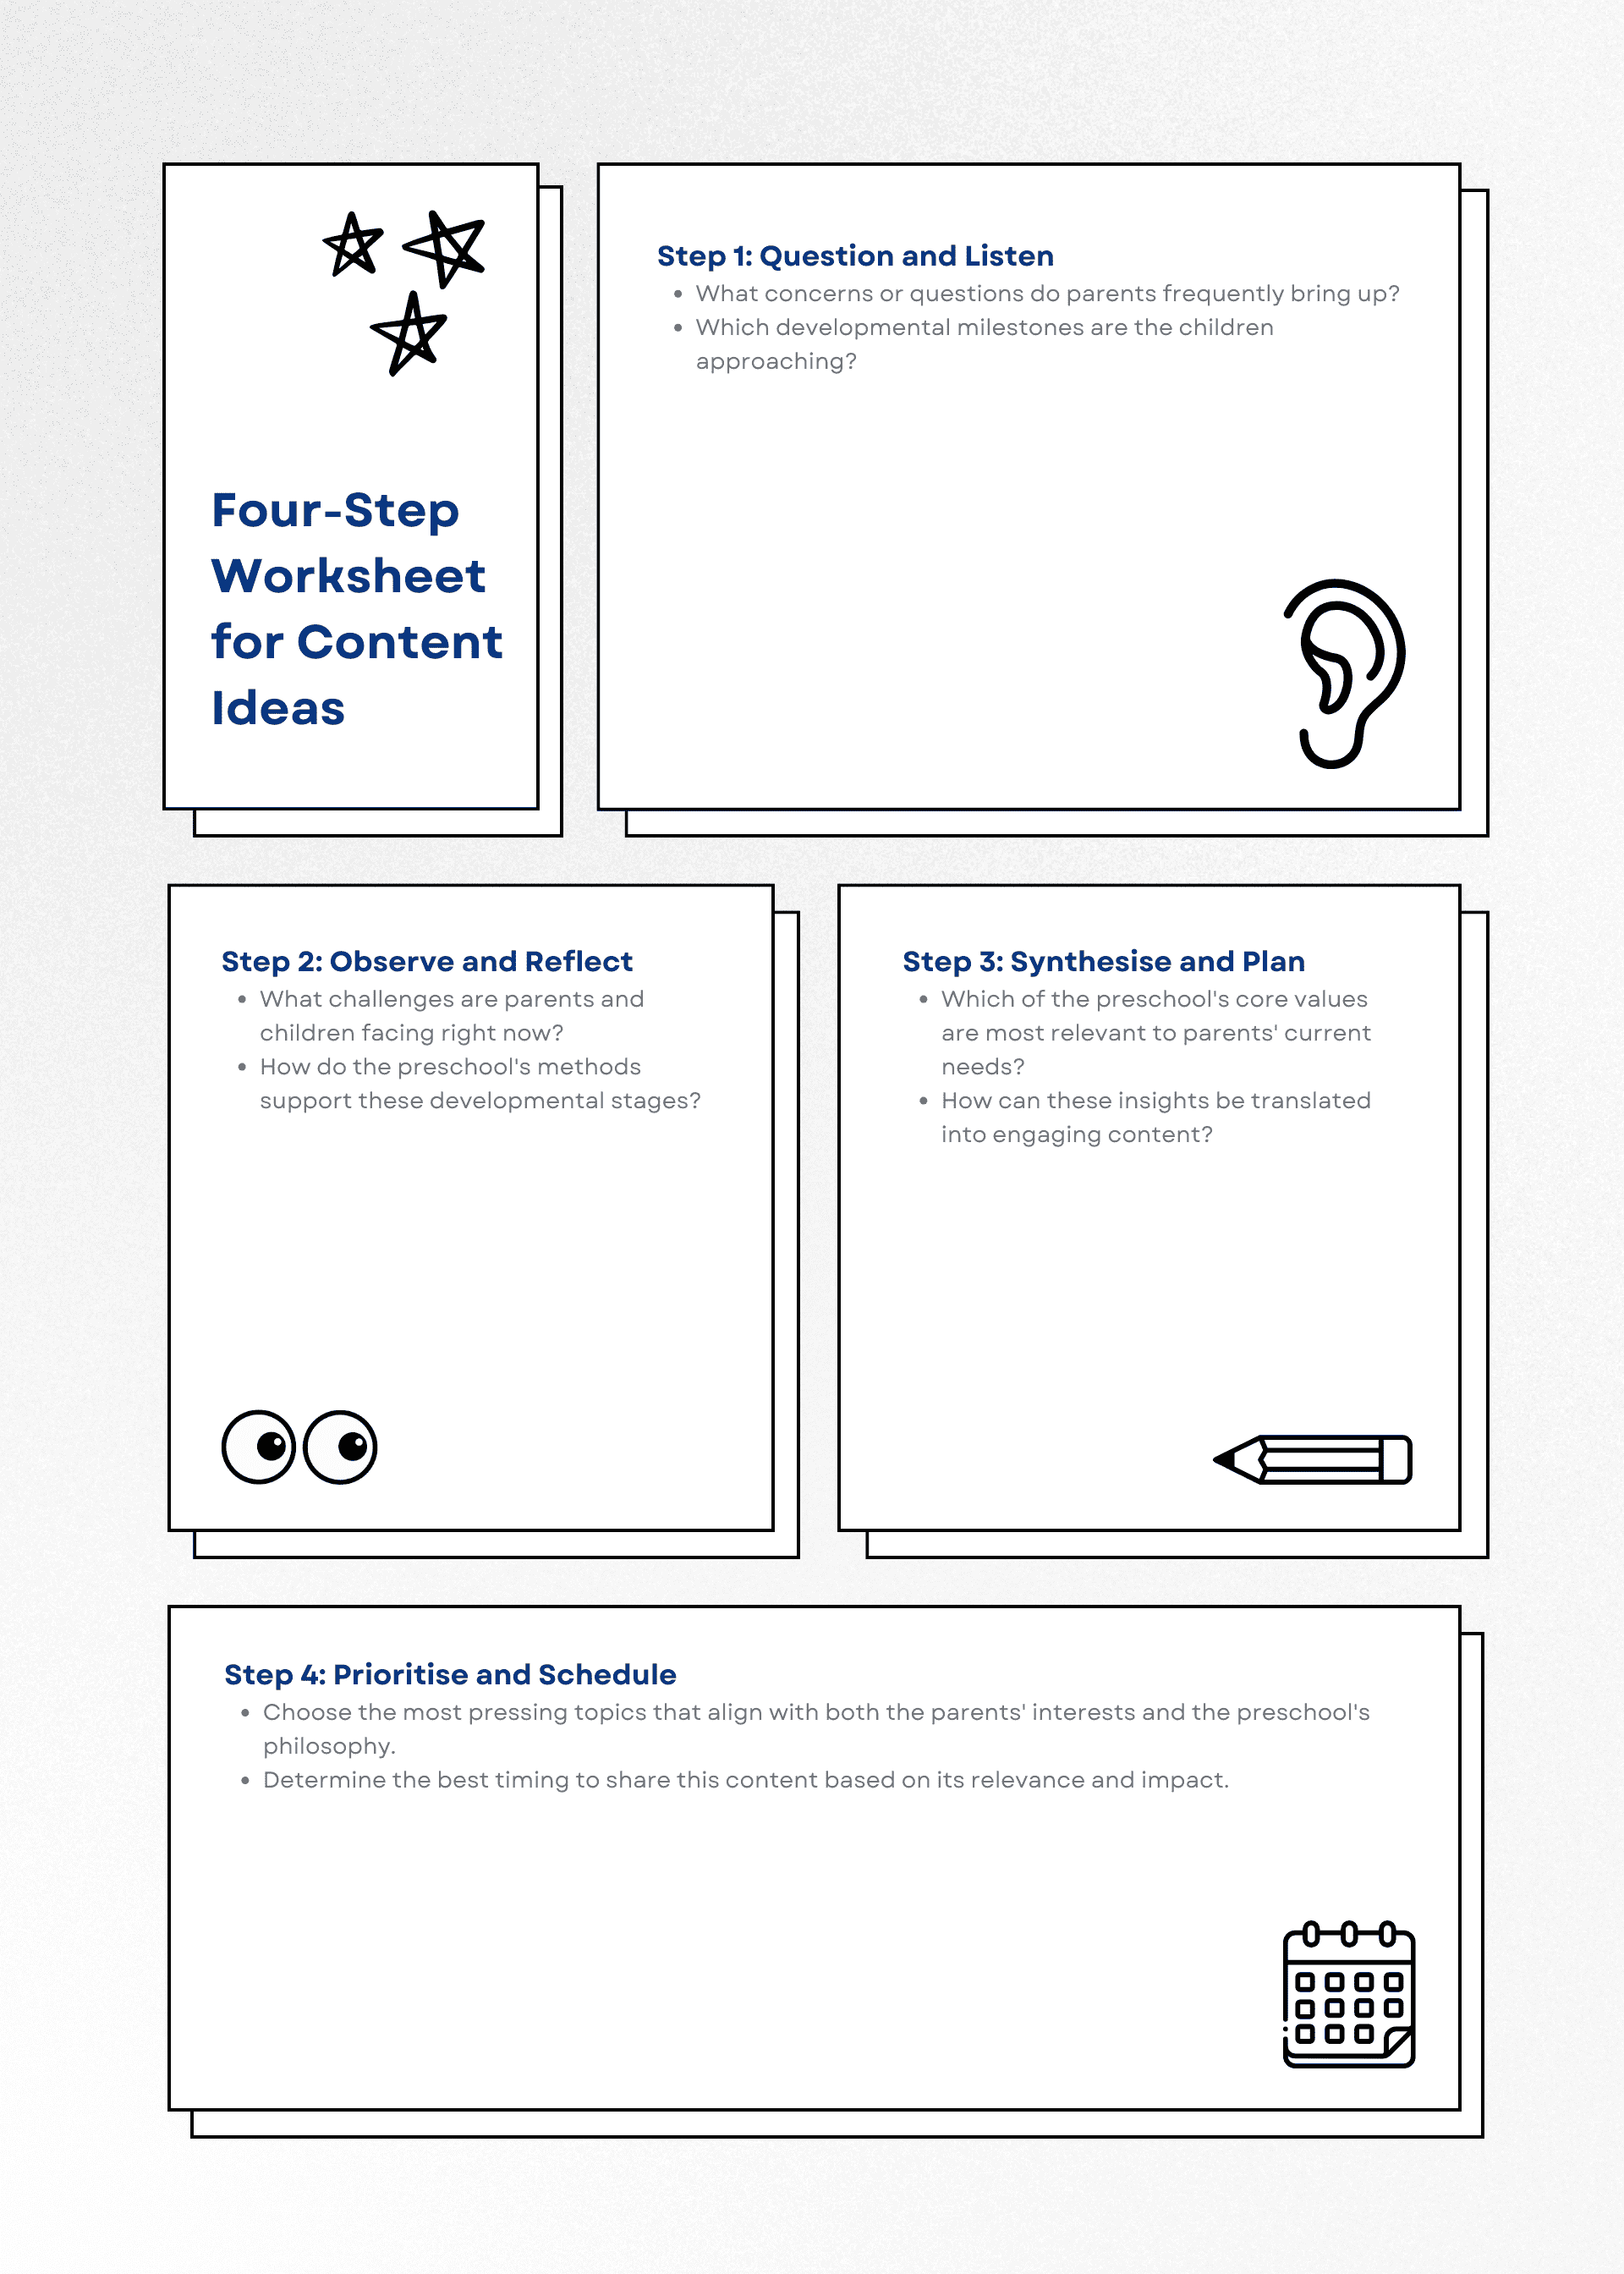 Four-Step Worksheet for Content Ideas